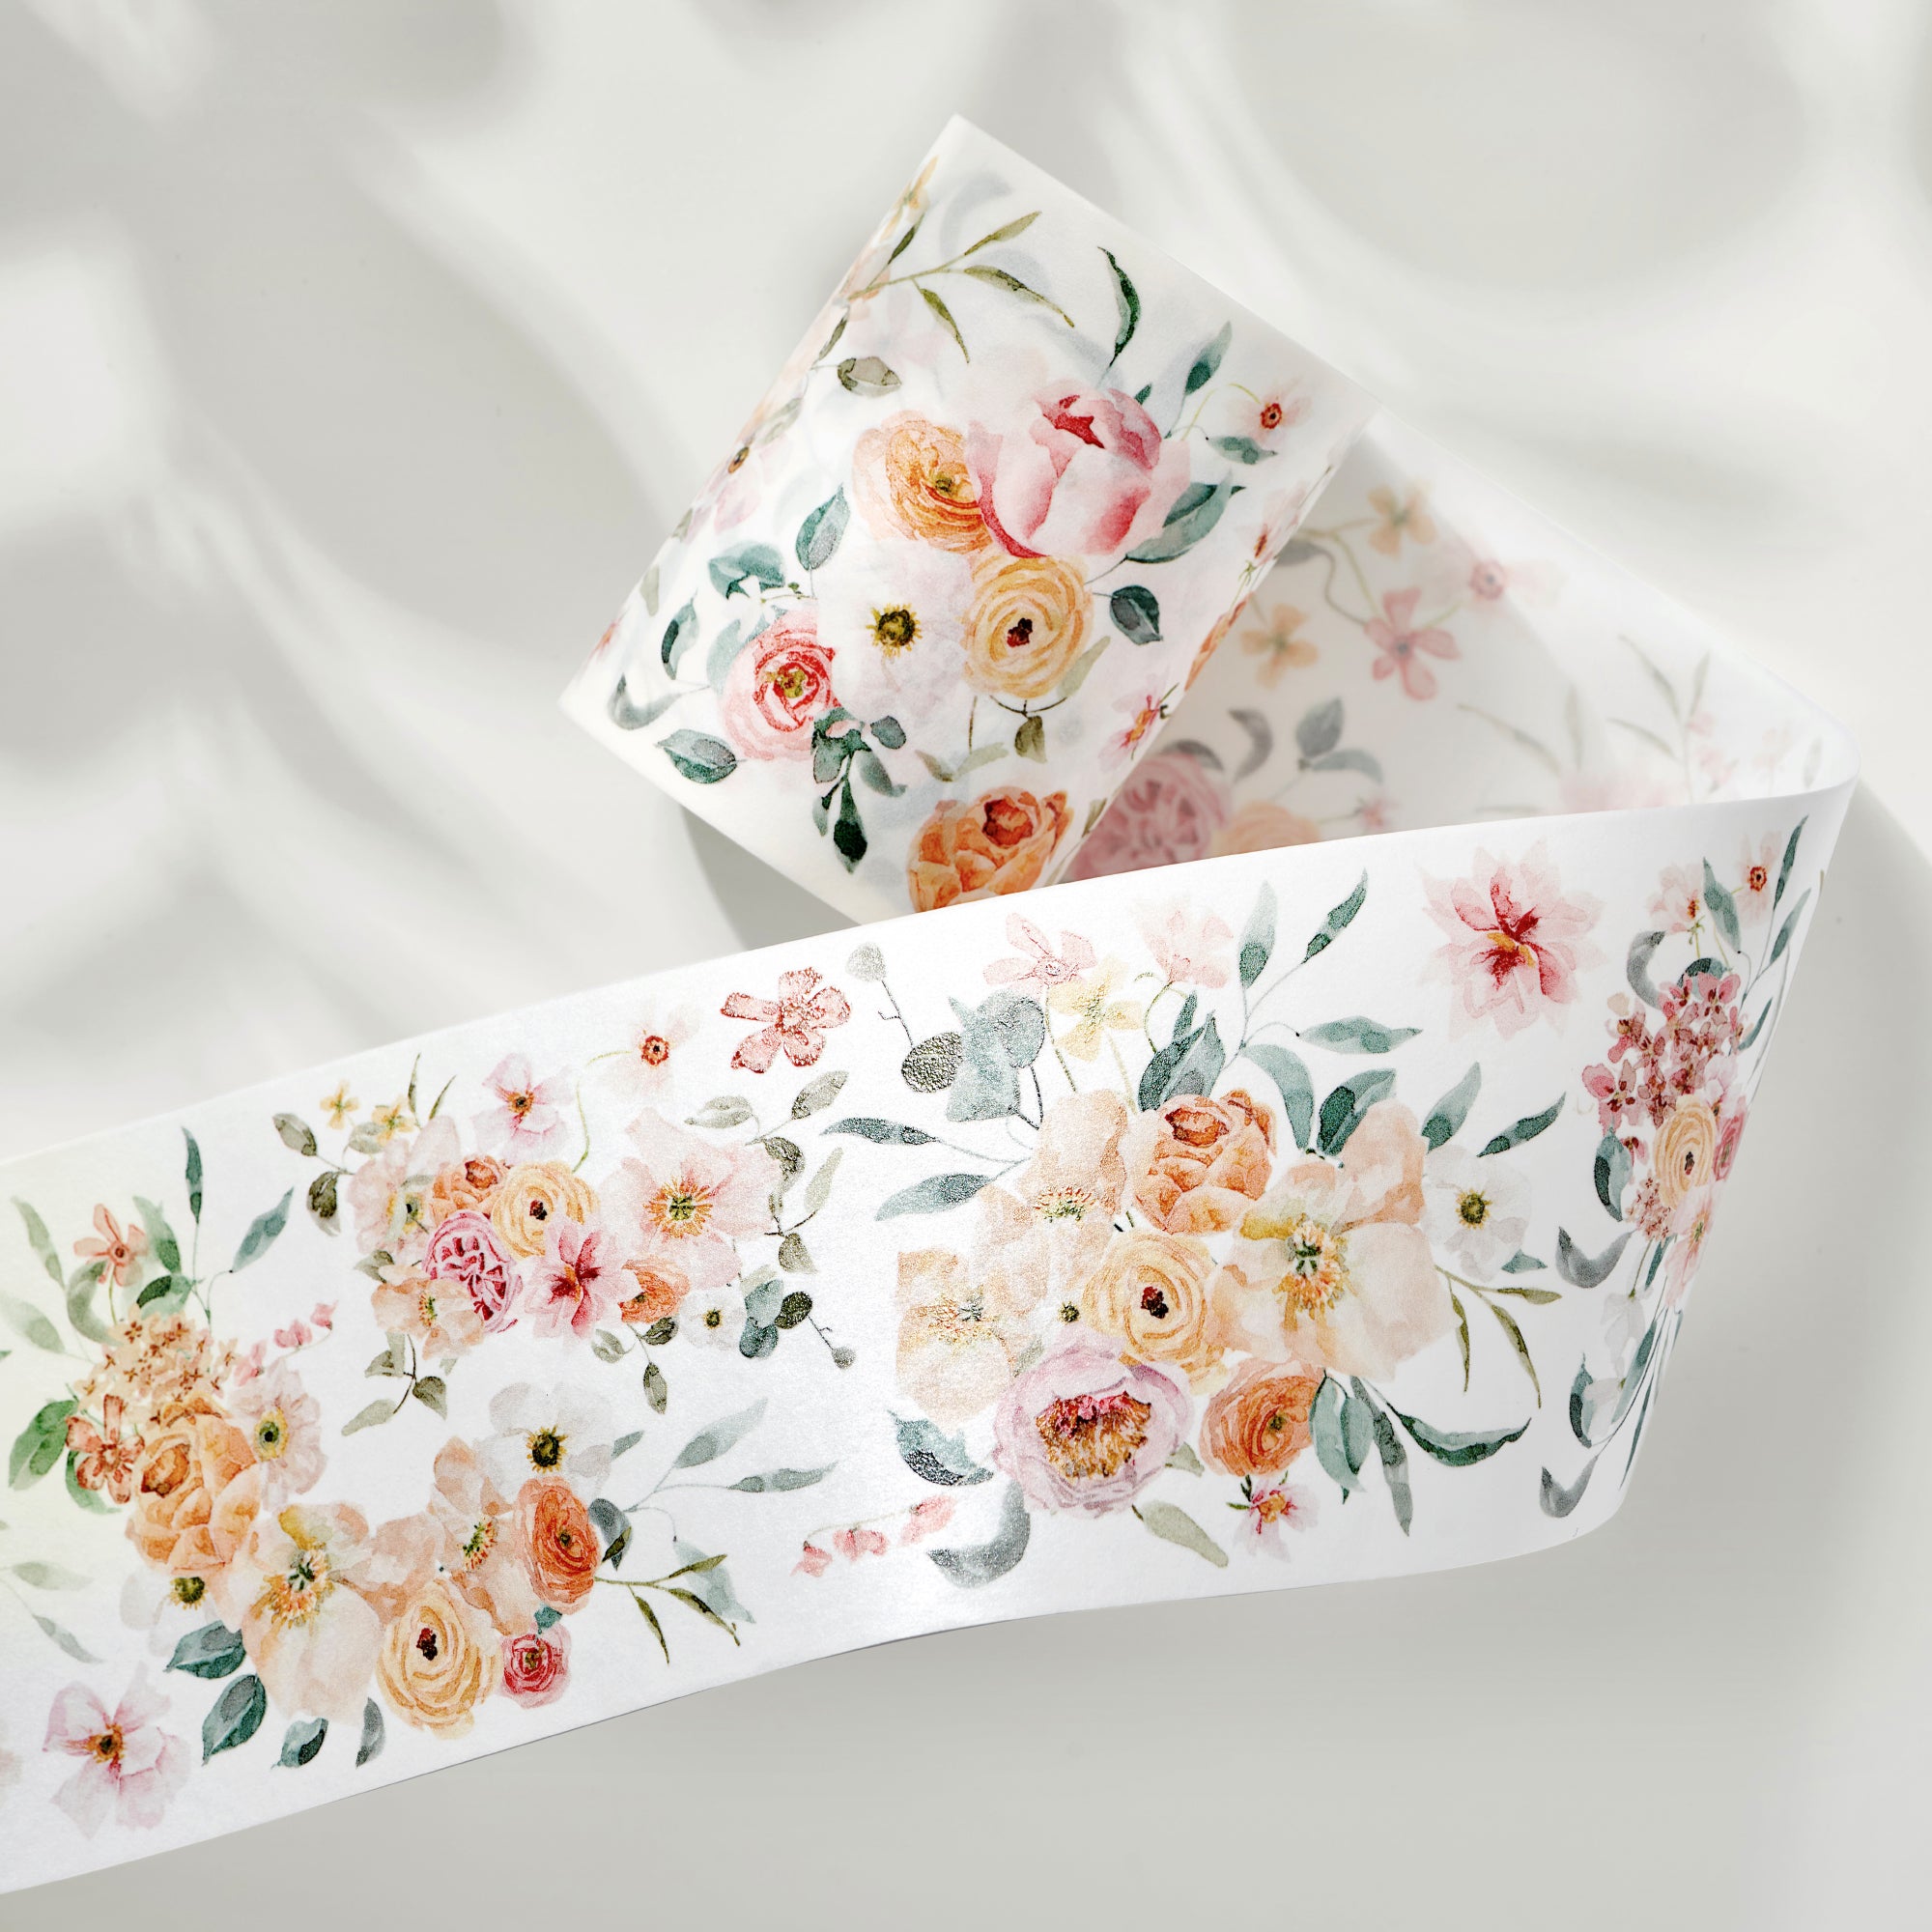 Spring Bloom Wide Washi / PET Tape | The Washi Tape Shop. Beautiful Washi and Decorative Tape For Bullet Journals, Gift Wrapping, Planner Decoration and DIY Projects